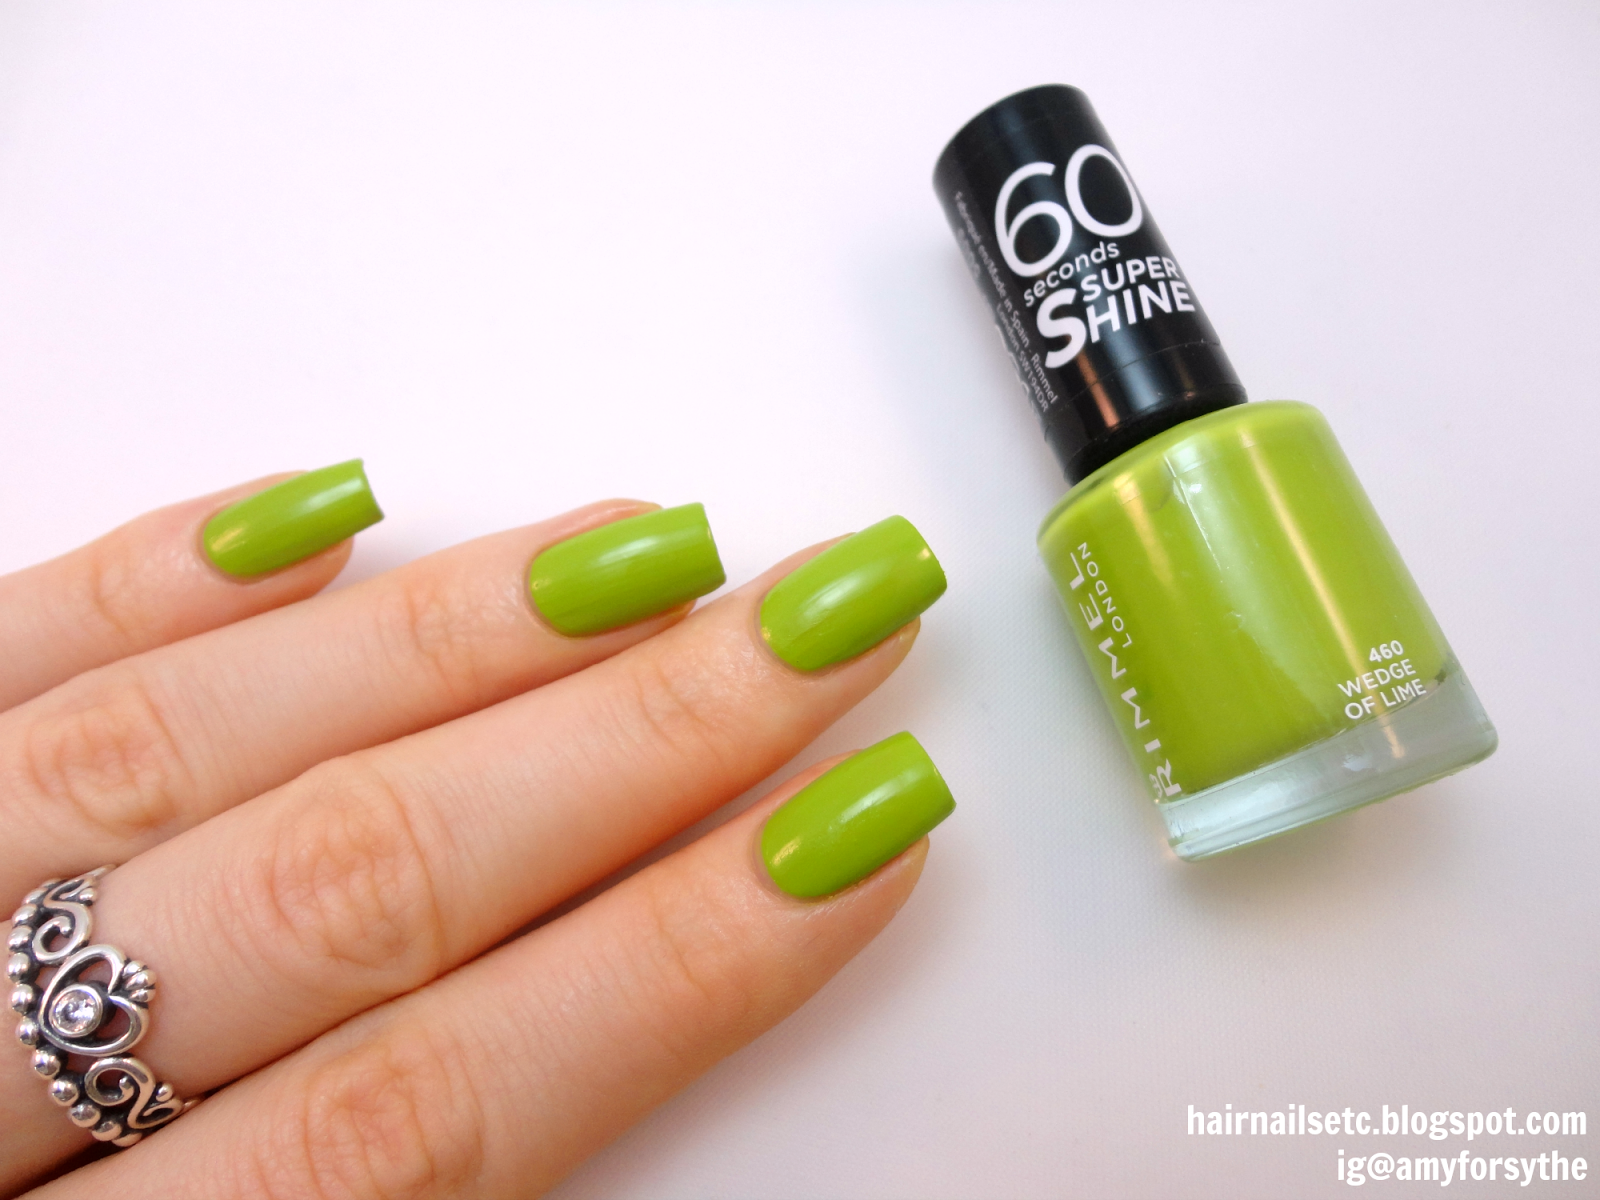 Rimmel New 60 Seconds Super Shine Nail Polish in Wedge of Lime Swatch and Review - hairnailsetc.blogspot.co.uk / instagram.com/amyforsythe